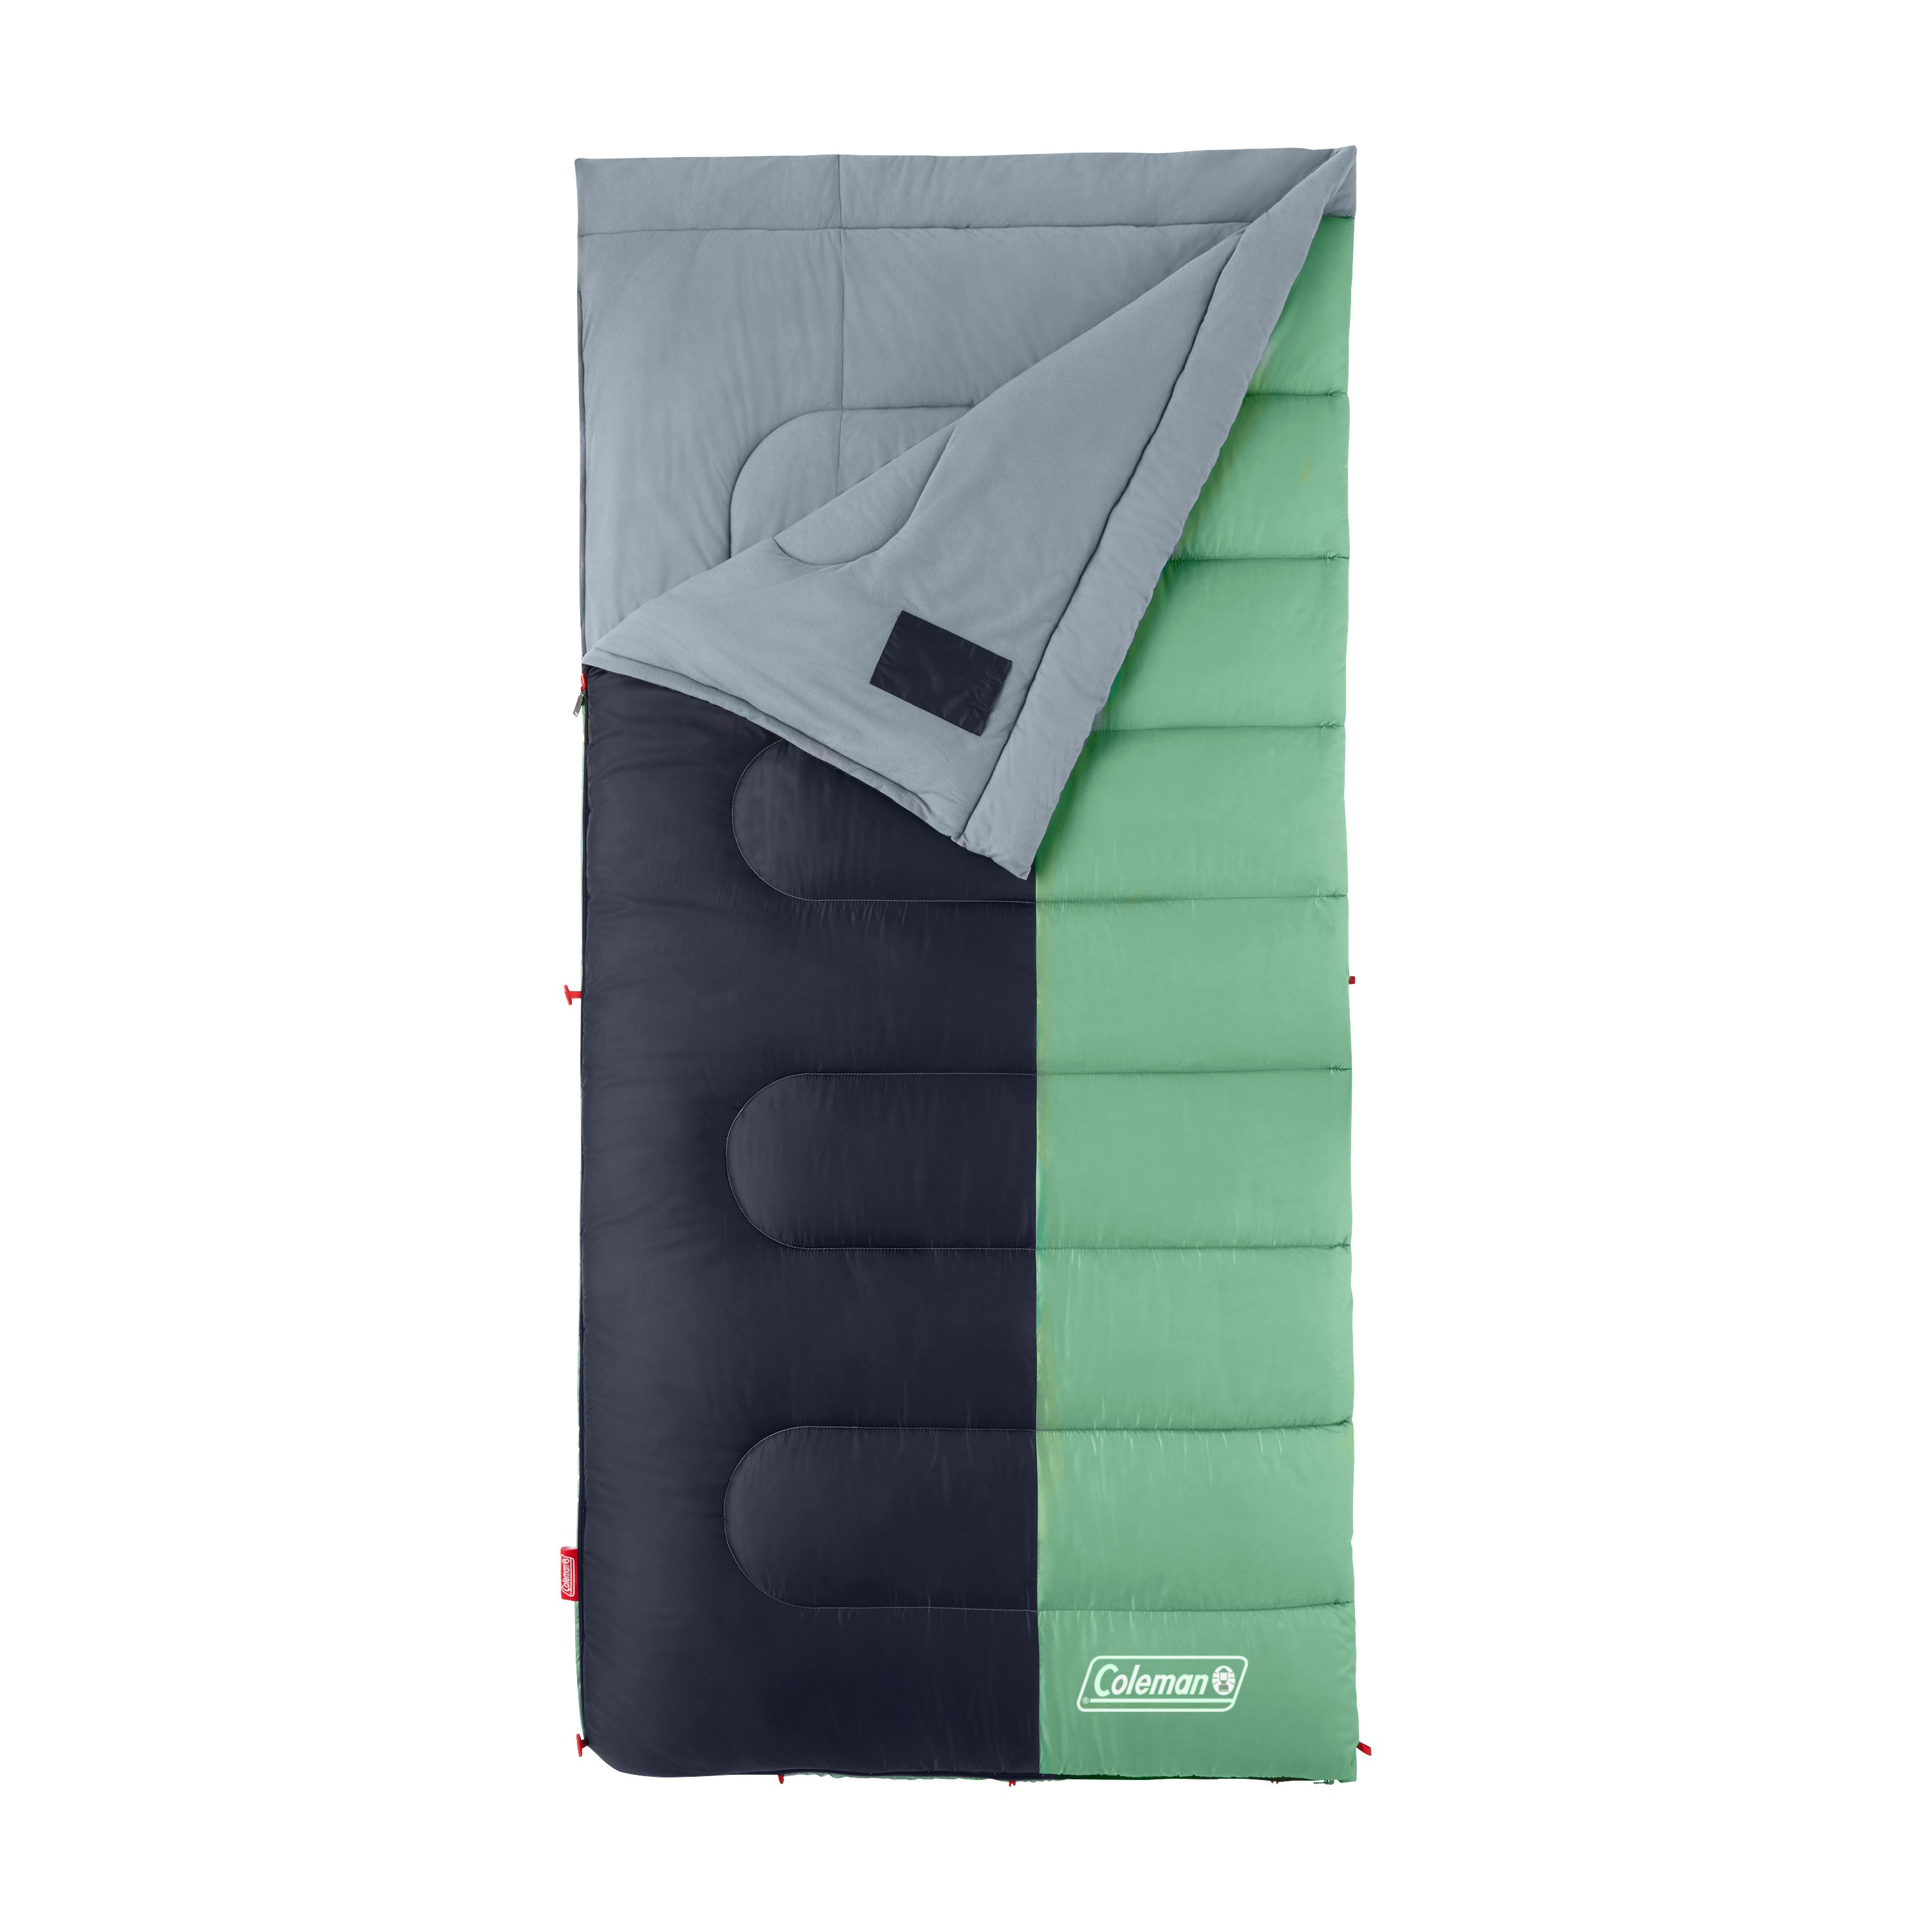 Details about  / Coleman Sleeping Bag40°F Big and Tall Sleeping BagBiscayne Sleeping Bag